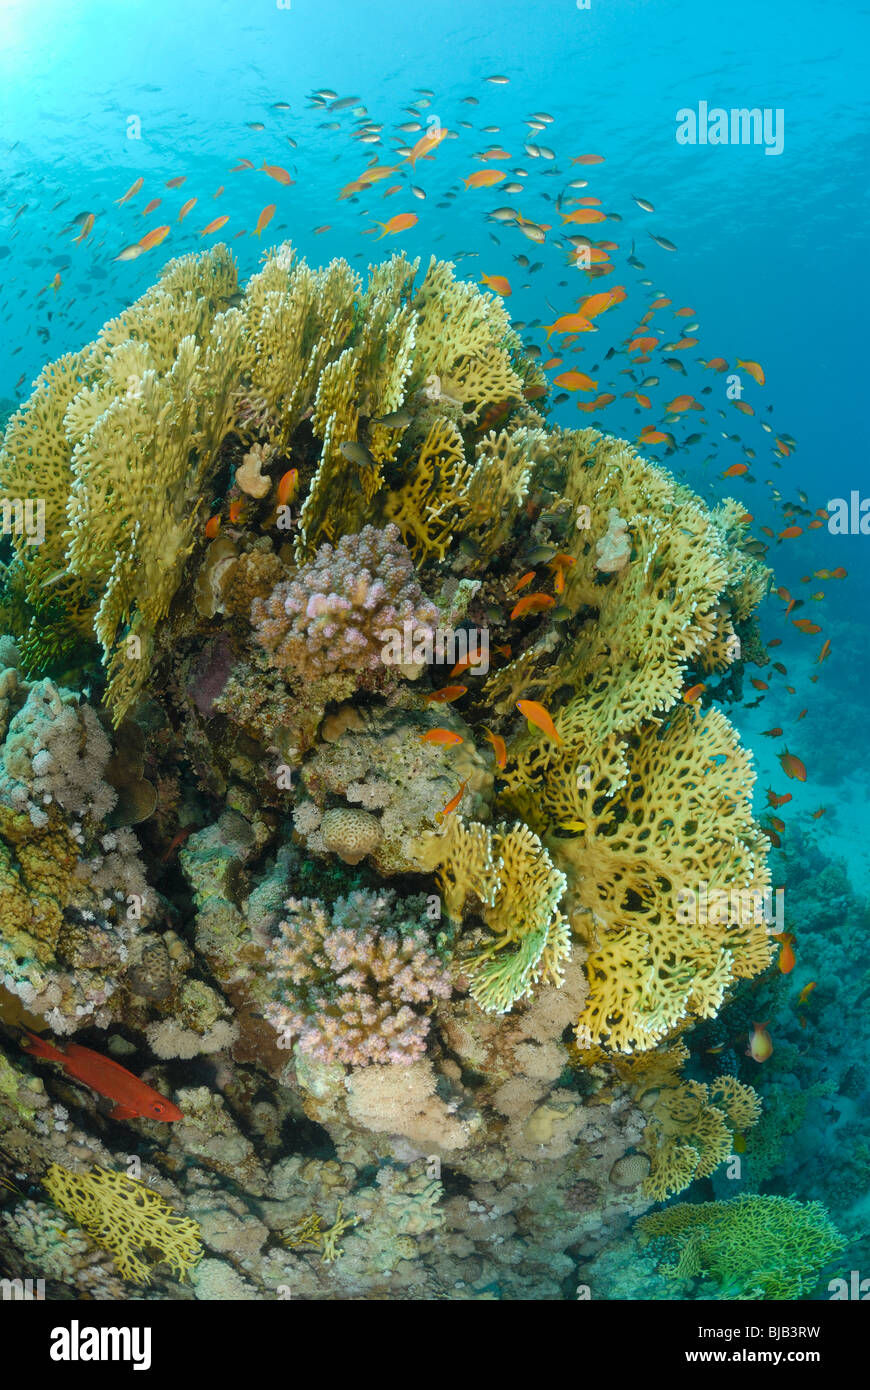 School of anthias over head of coral off Safaga, Egypt, Red Sea. Stock Photo